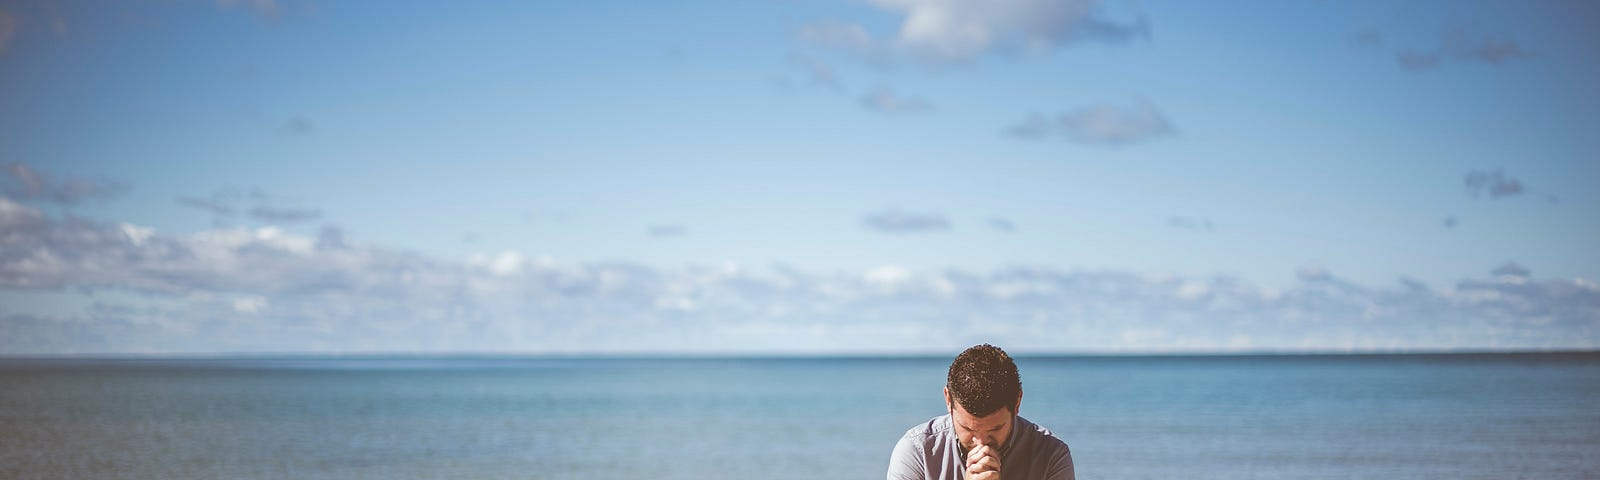 A man kneeling in prayer in front of a body of water.